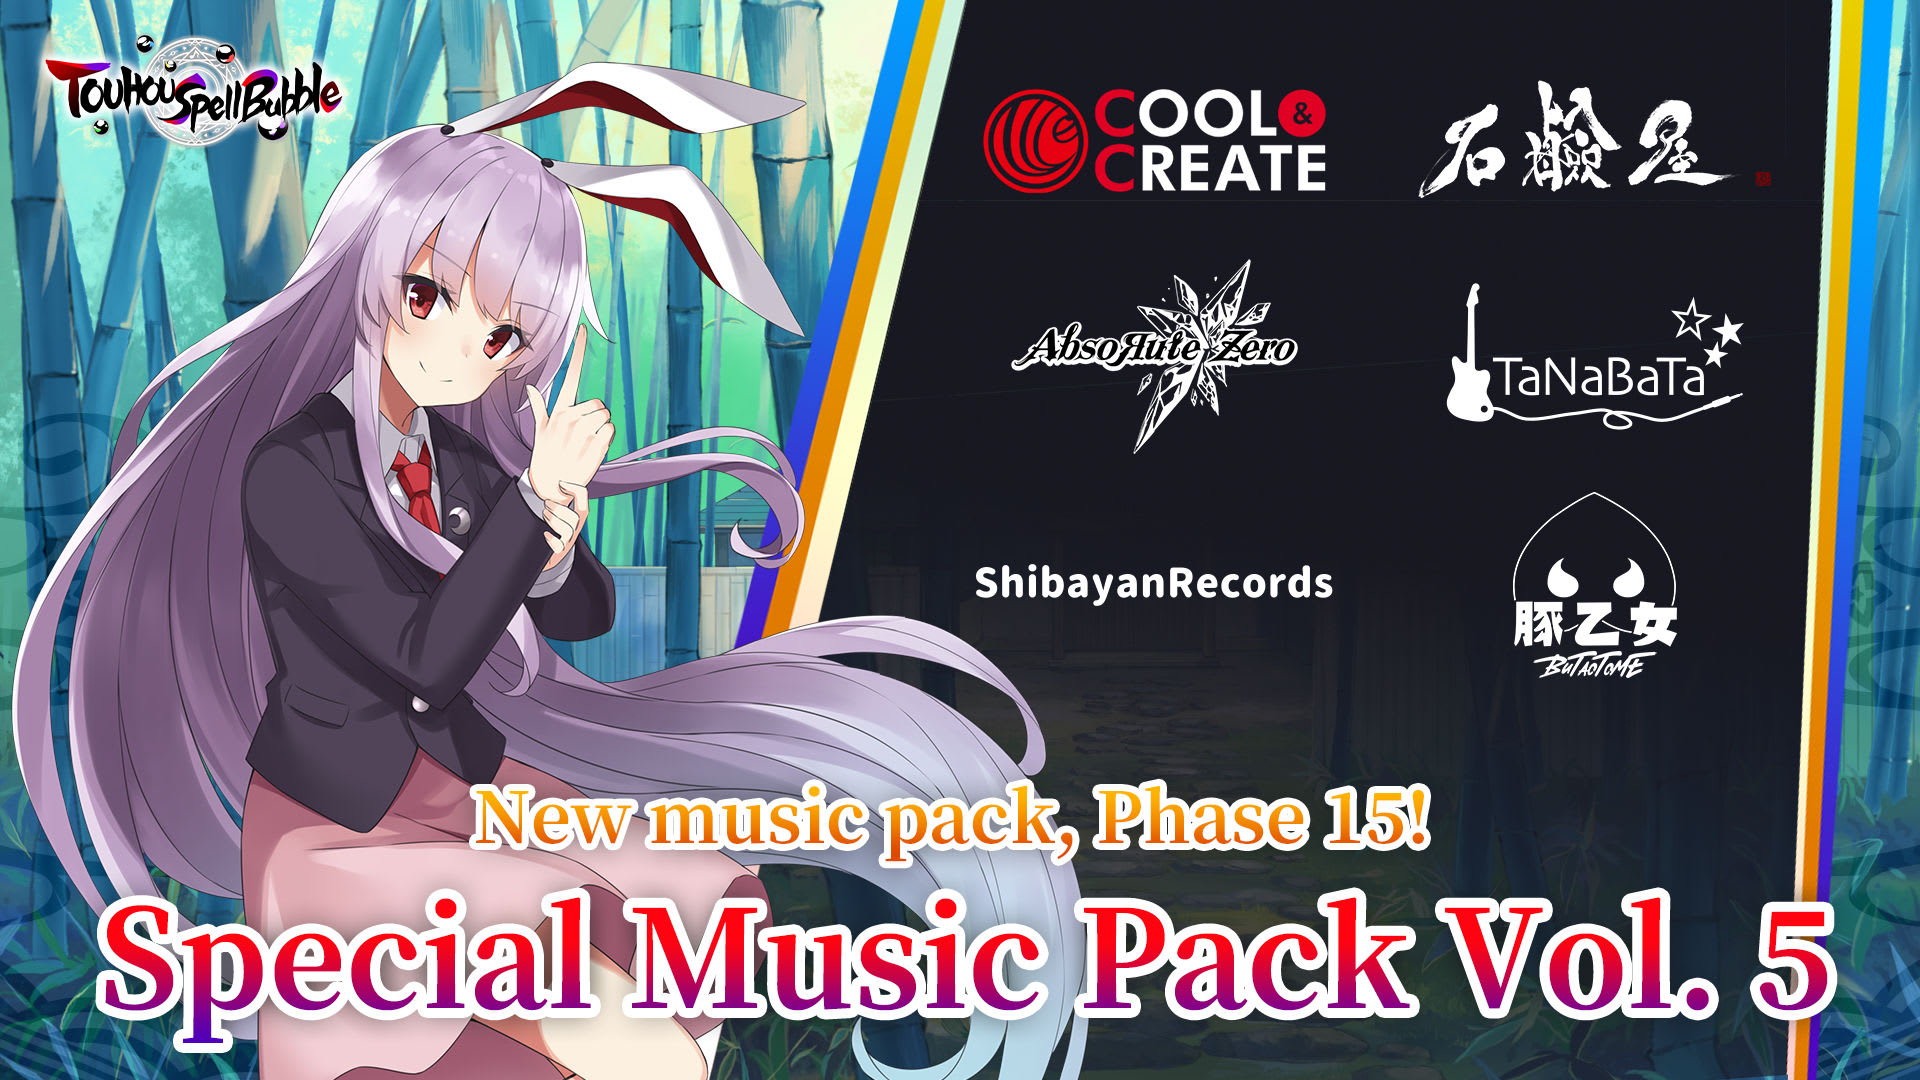 Special Music Pack Vol. 5